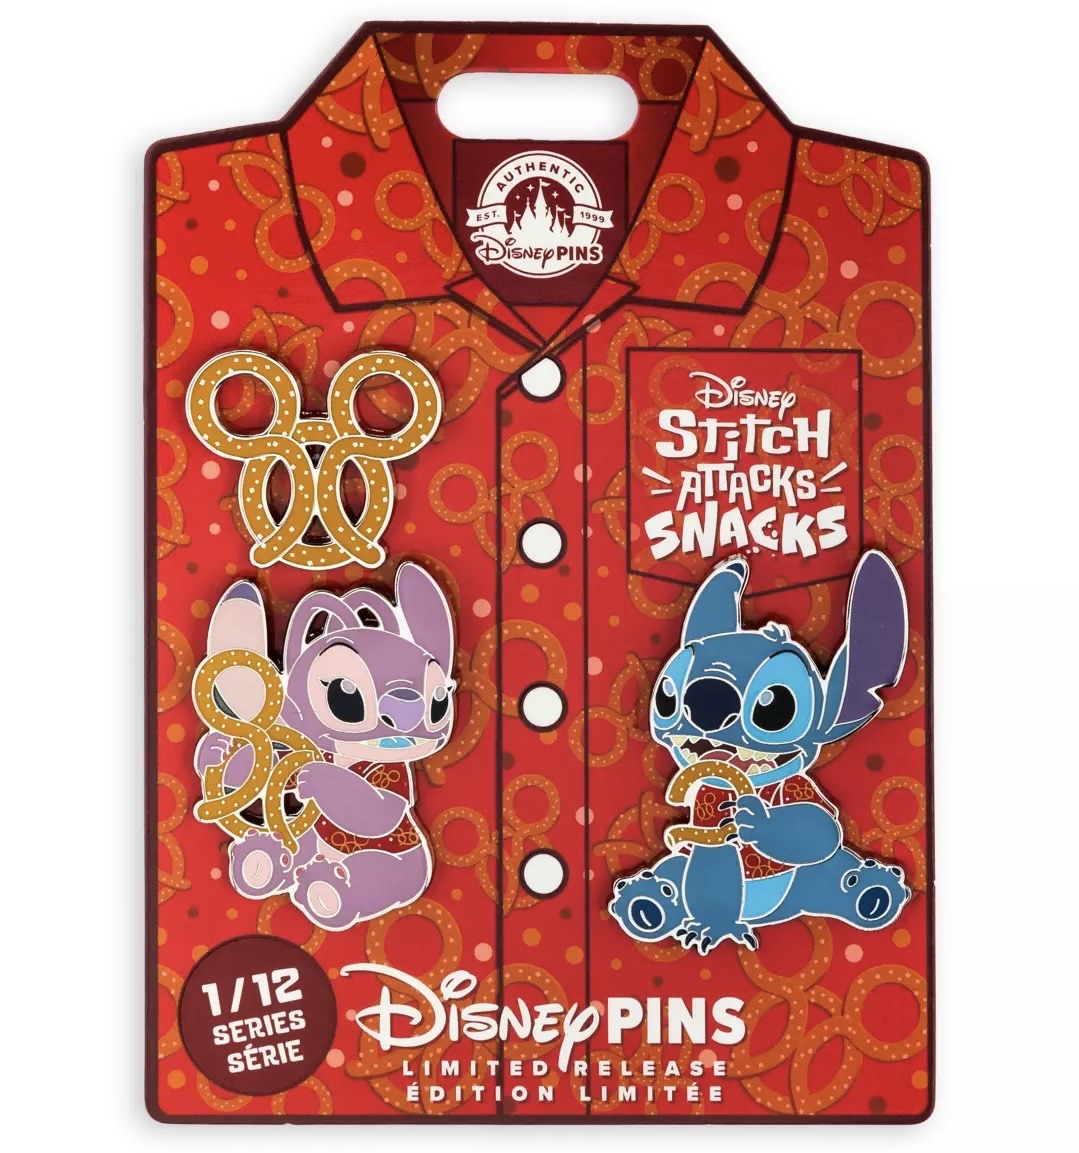 Here is a look at the latest Stitch pin - Disney Pins Blog